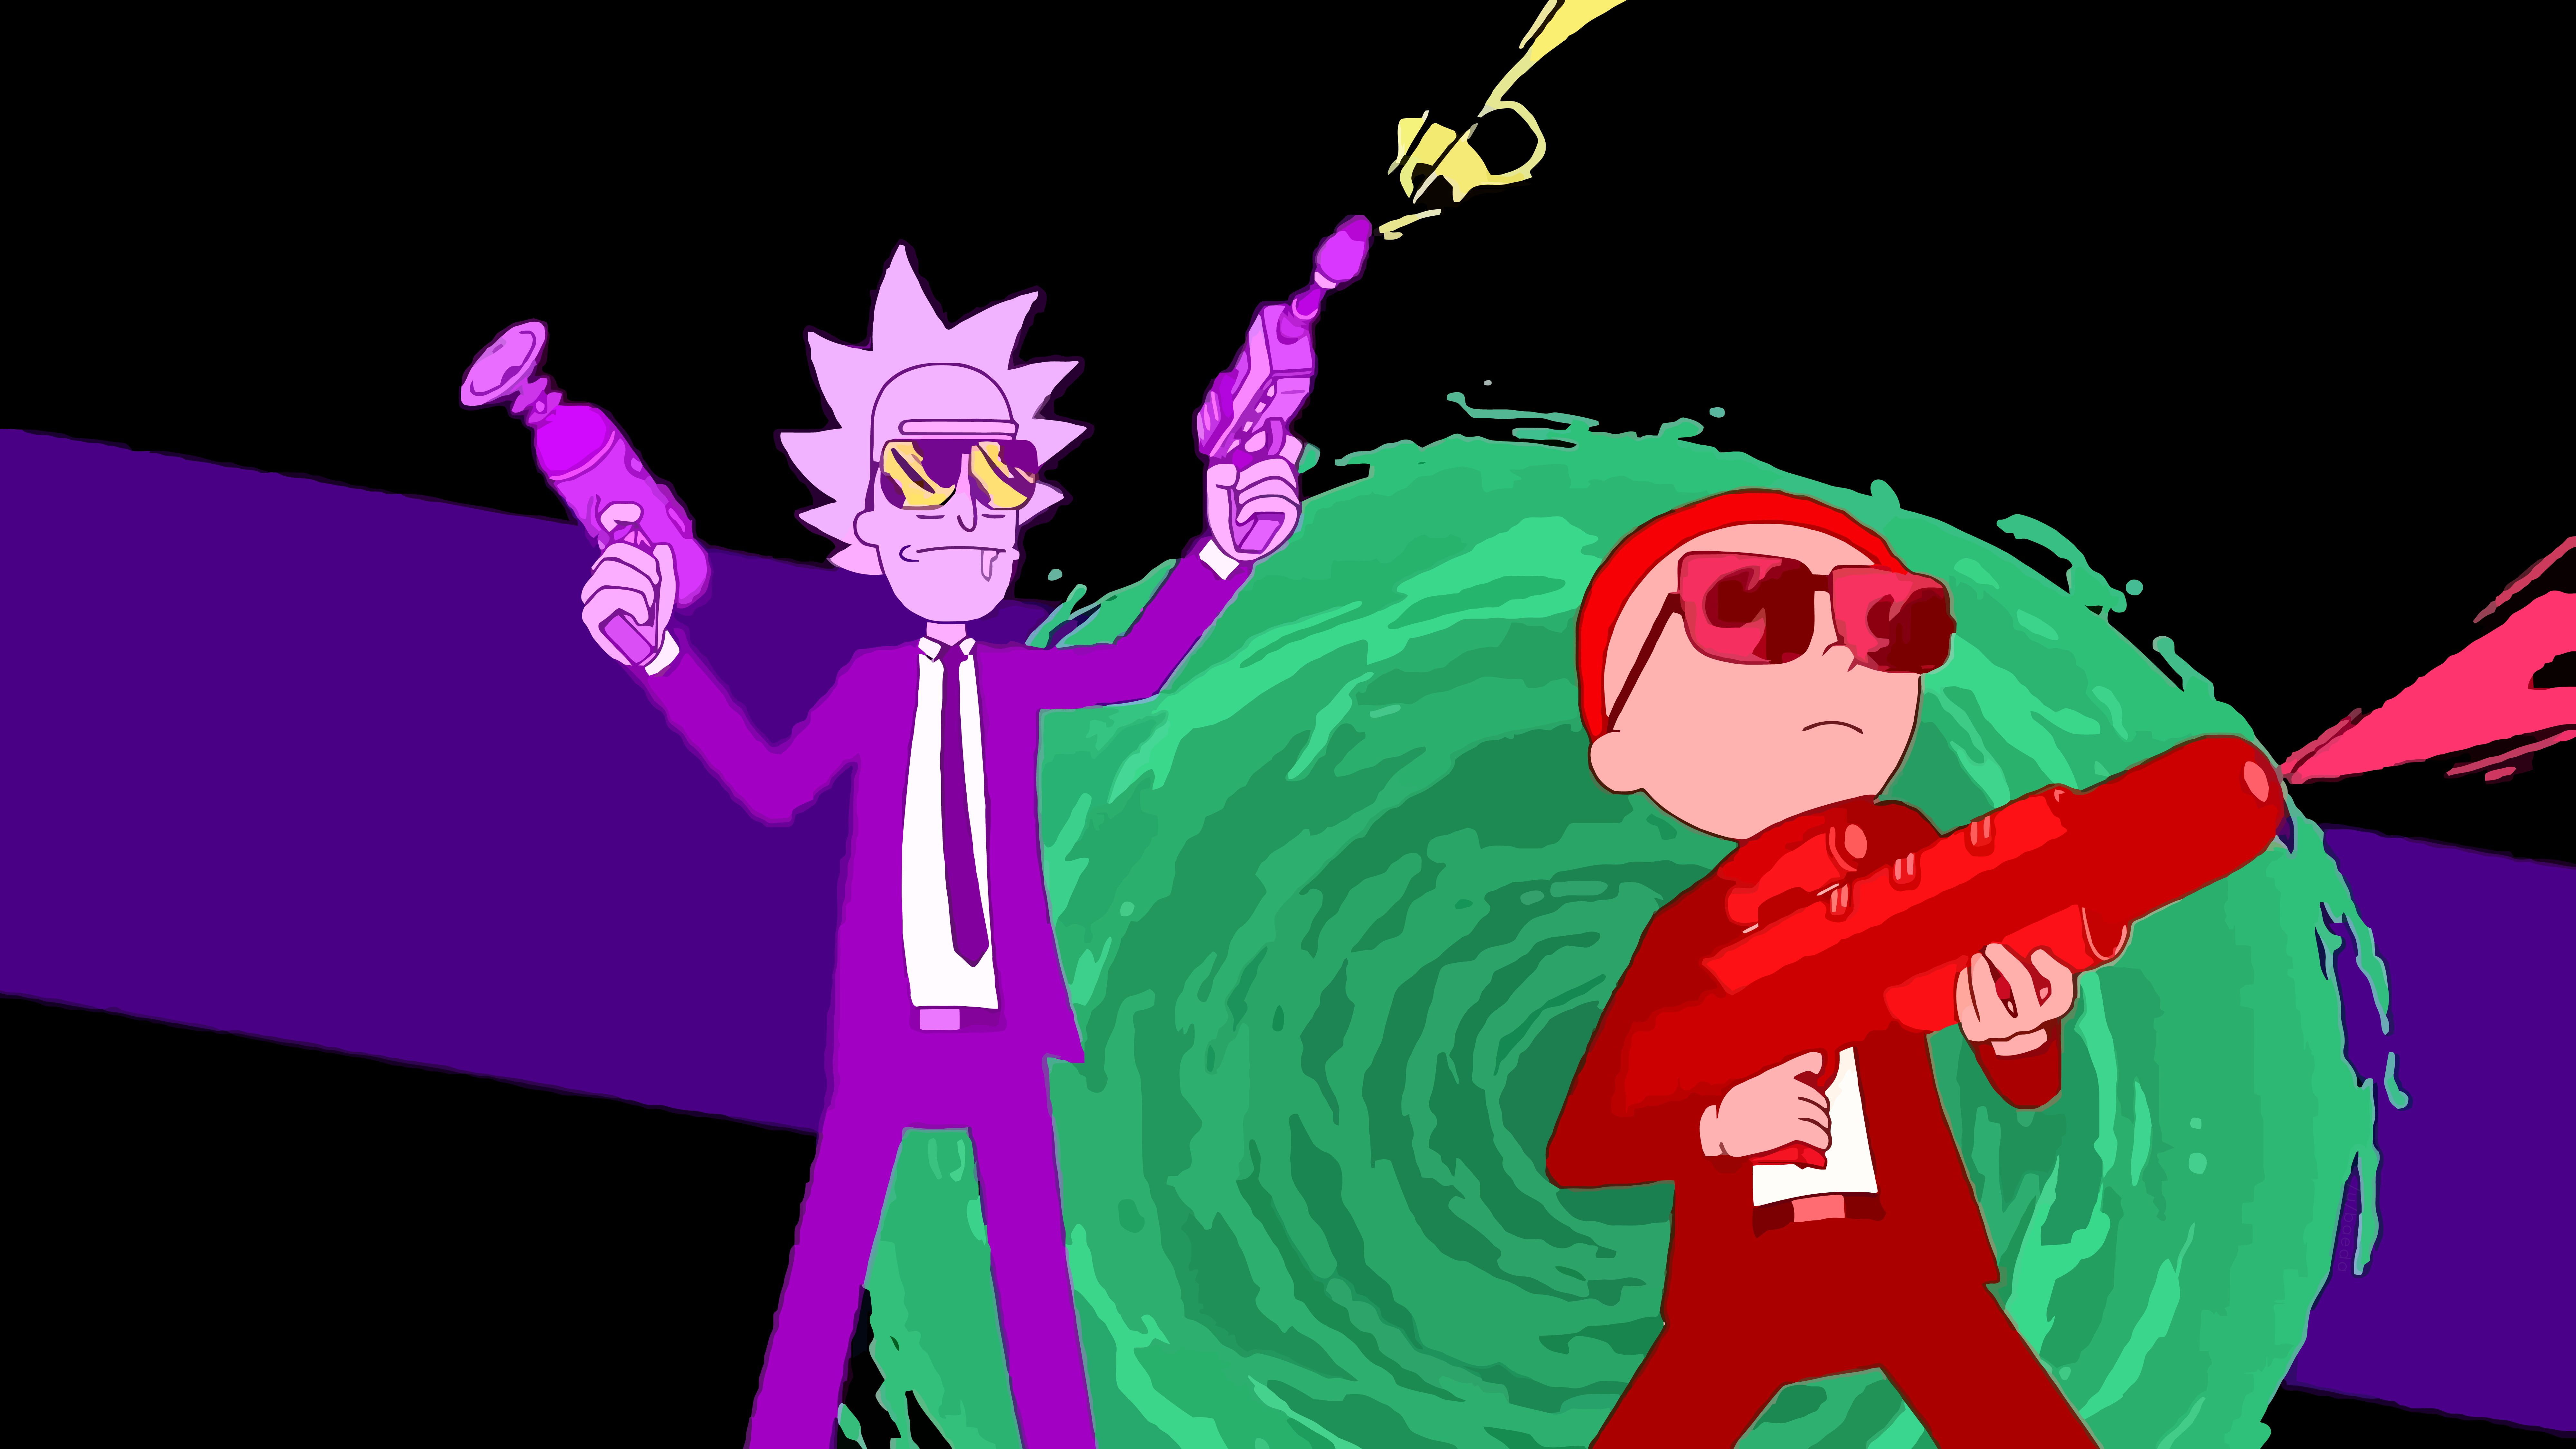 Rick and Morty Run the Jewels vector graphics K #wallpaper